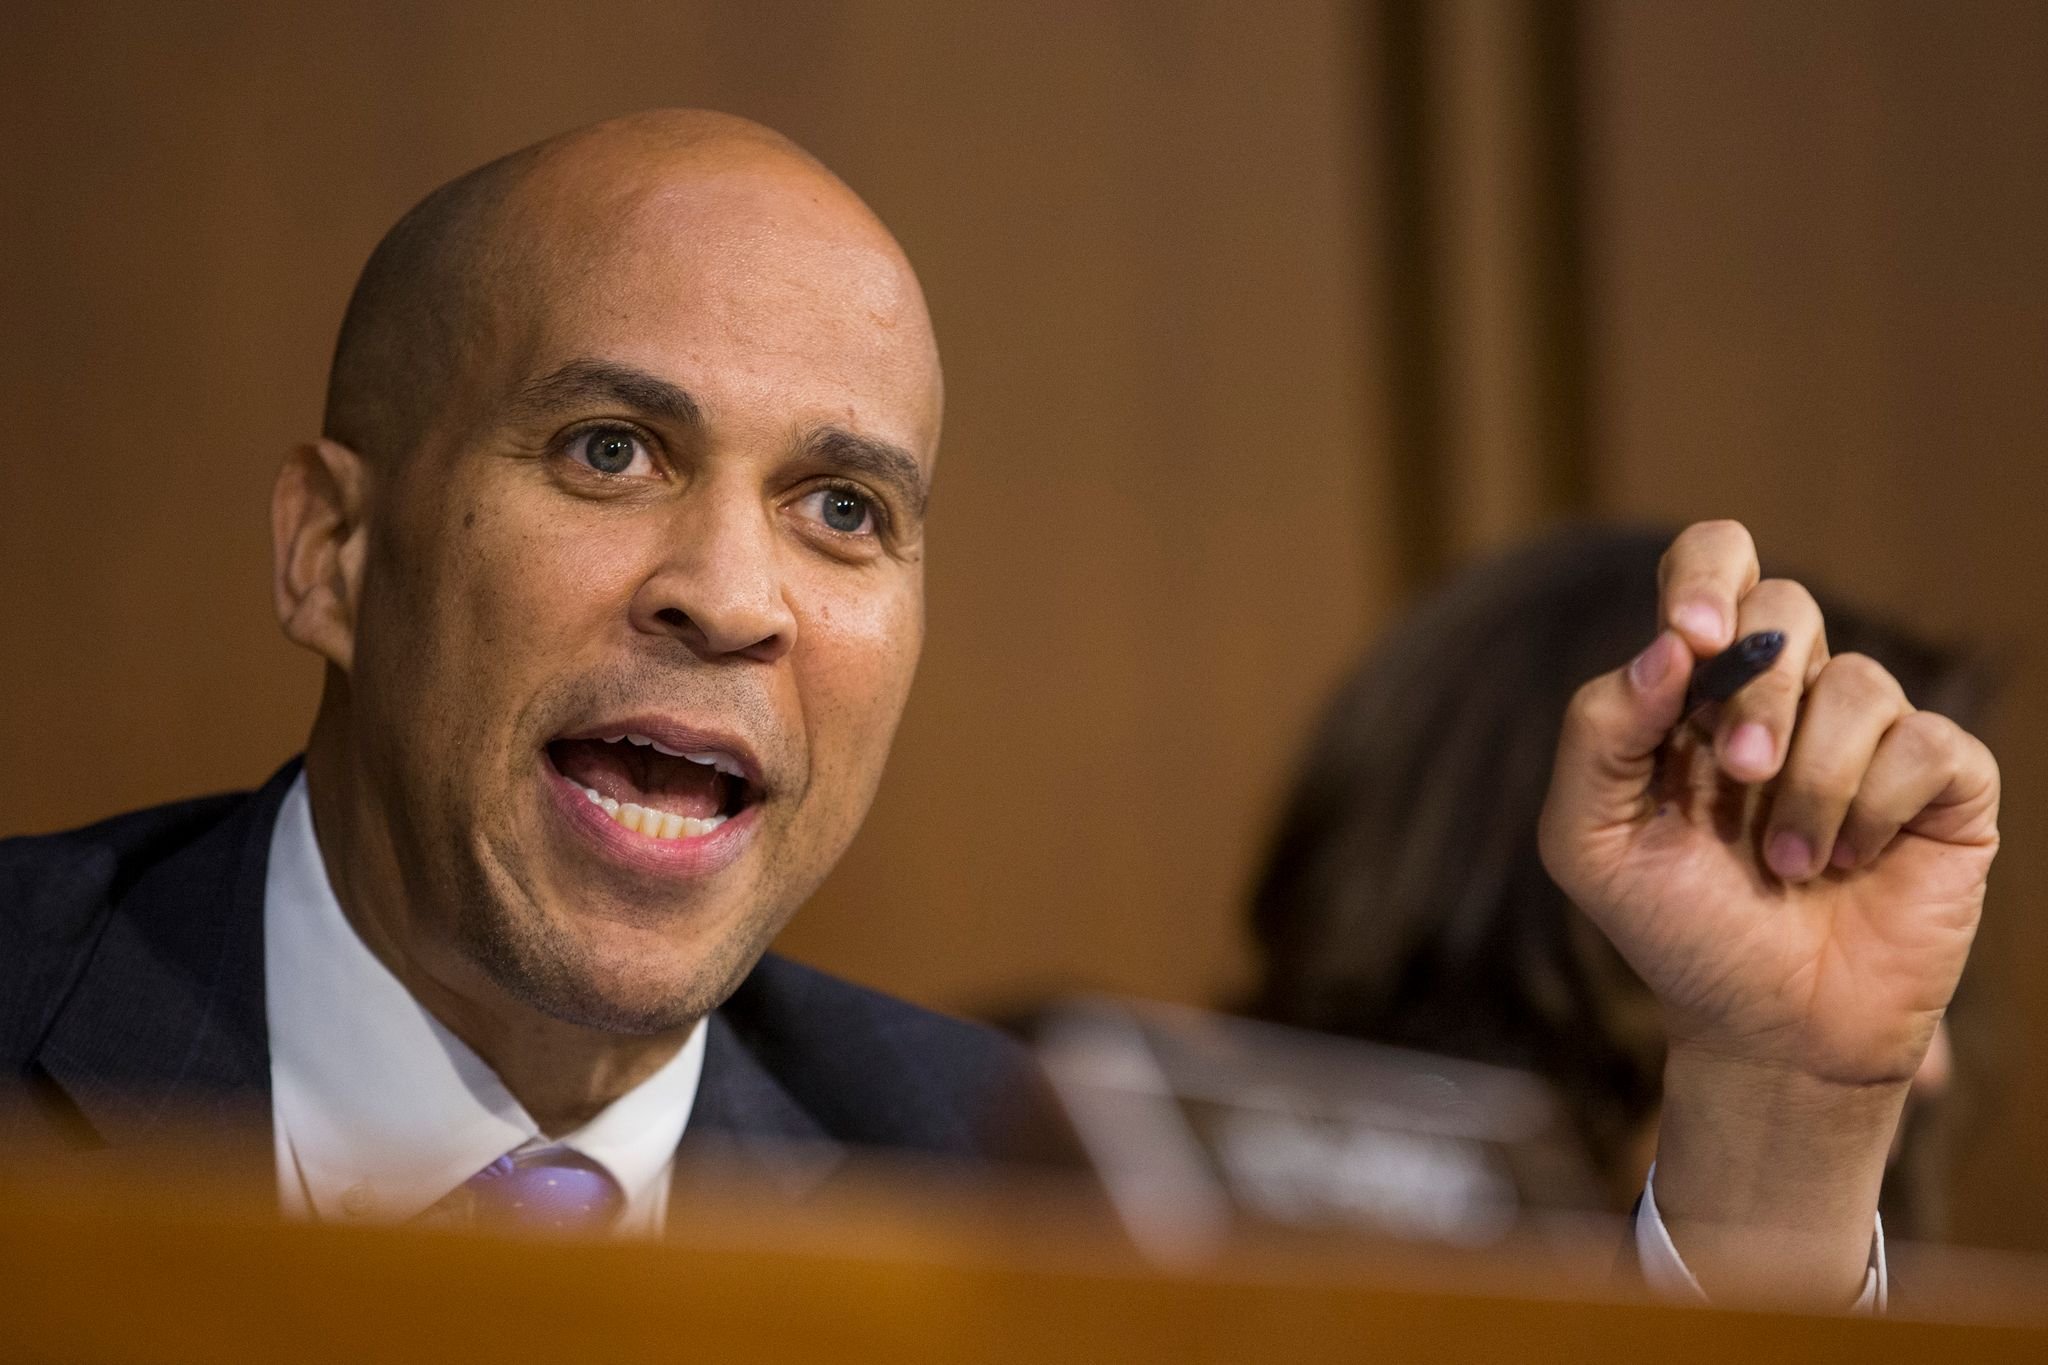 Senator Cory Booker speaking at a hearing on Capitol Hill in September 2018 in Washington D.C. | Source: Getty Images